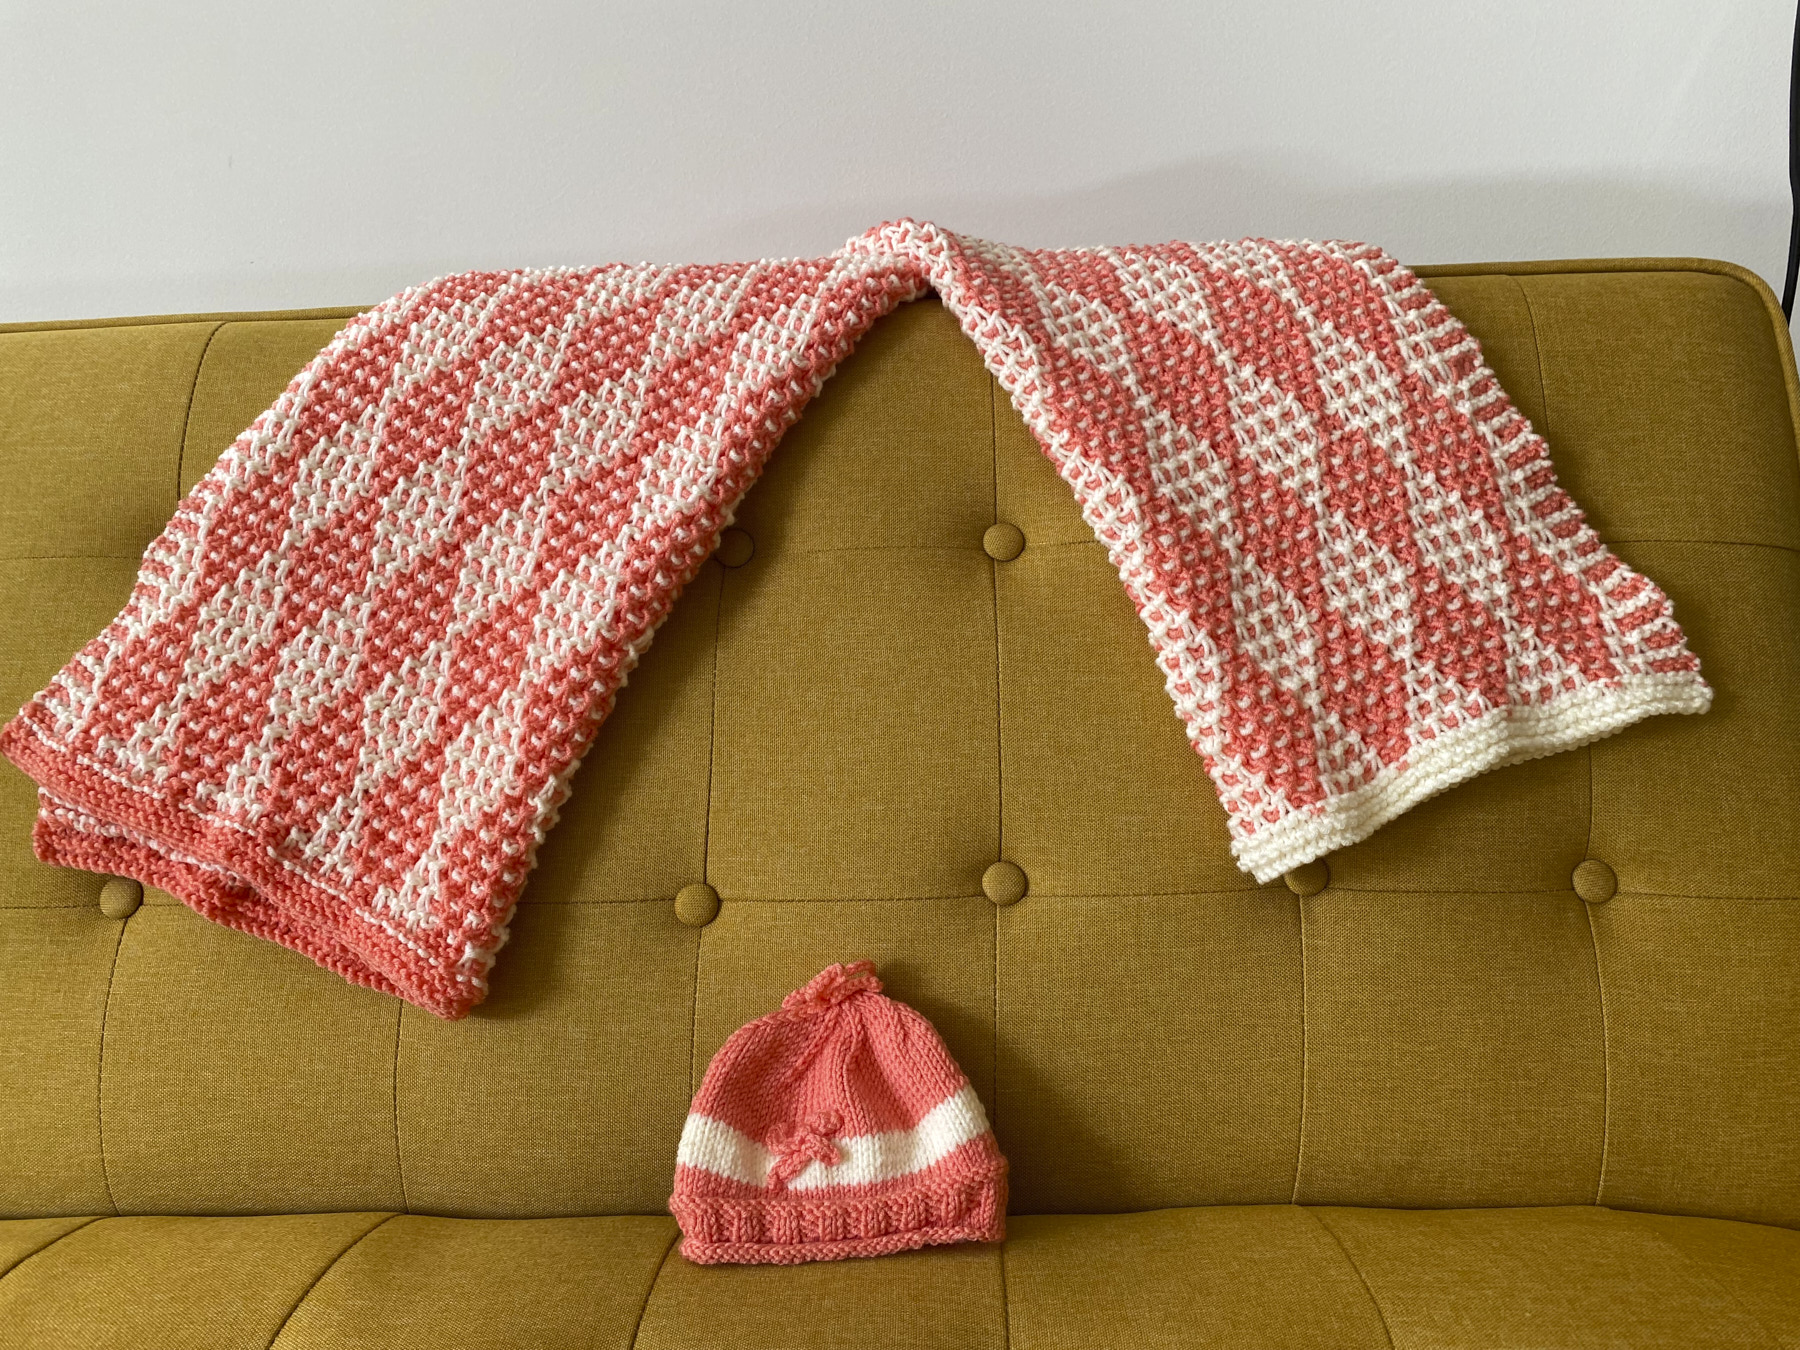 Two blankets with reversed colors and hat